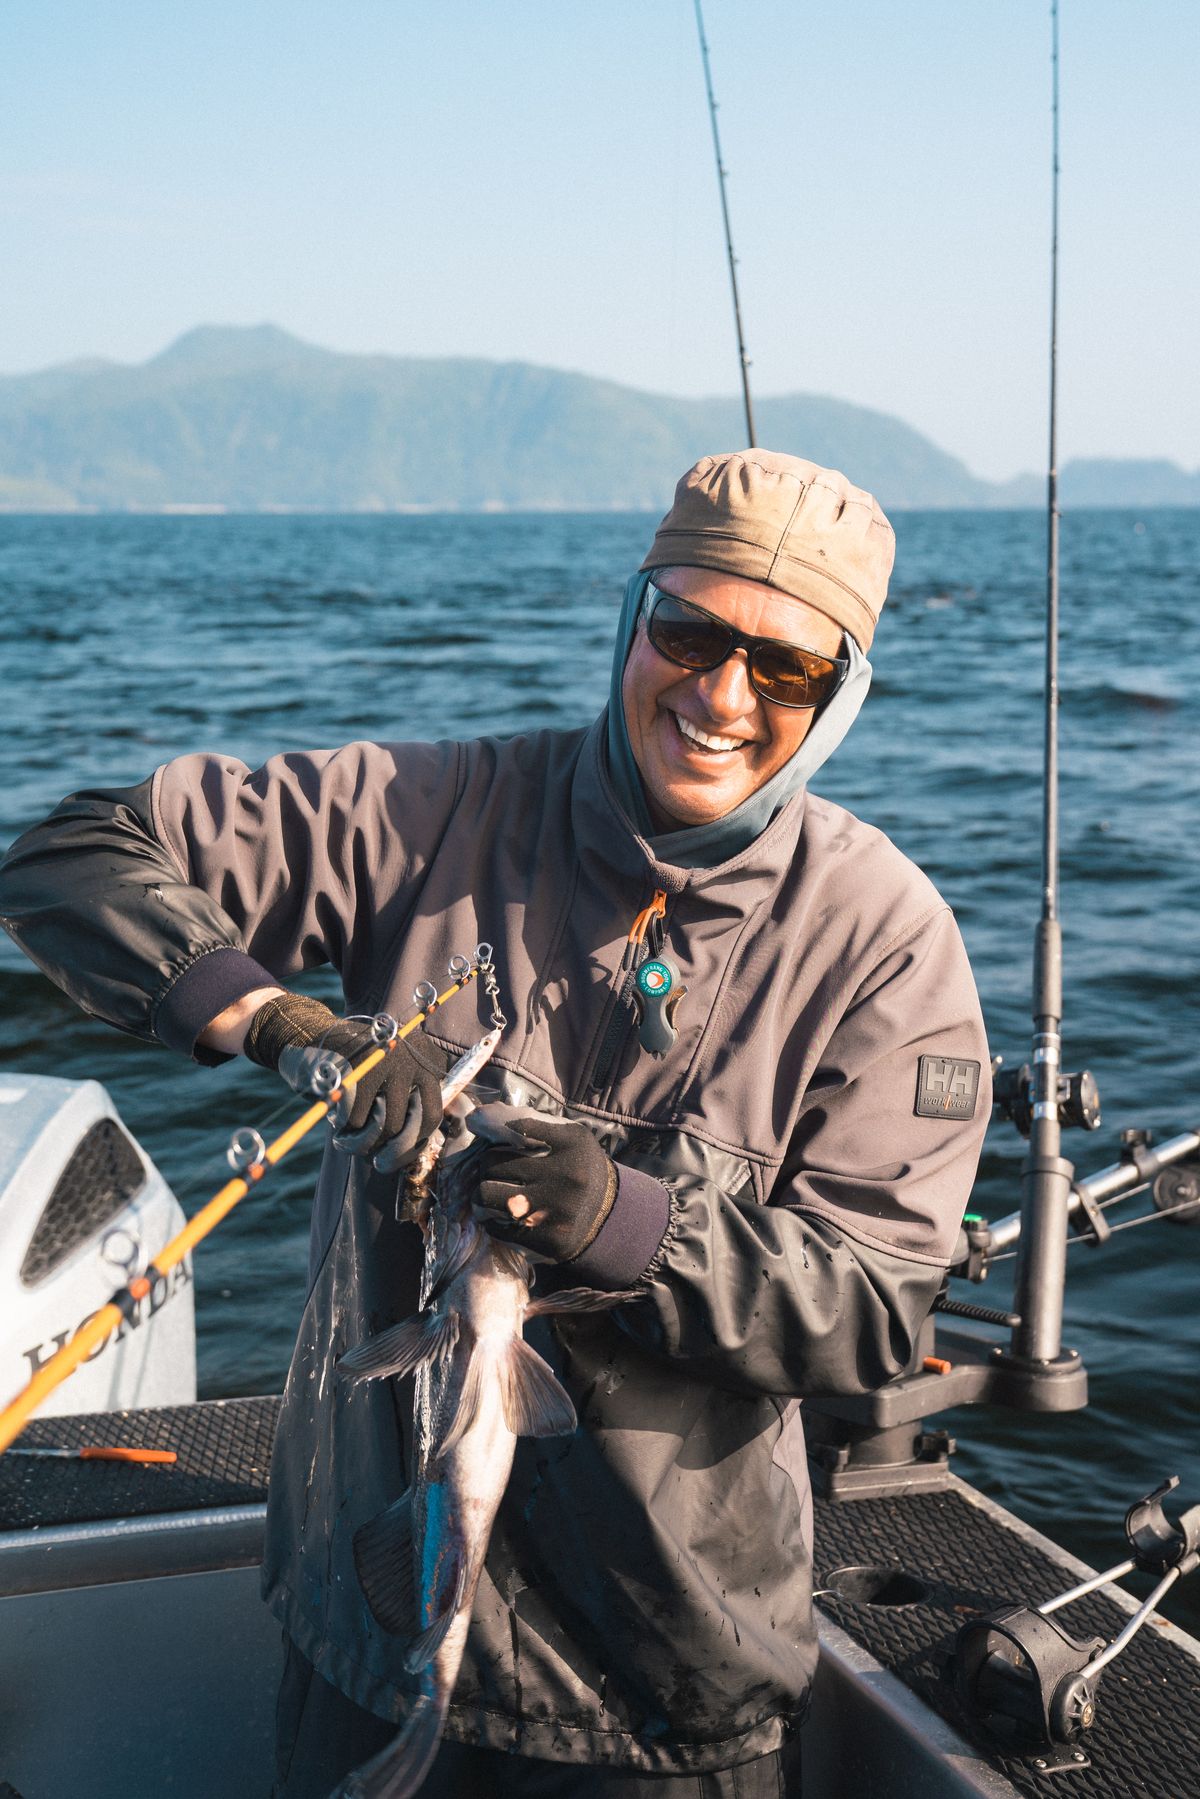 Mike Bunker, 54, of Coeur d’Alene is a fishing guide who leads tours in Washington, Oregon and Alaska. Bunker is a guide at Salmon Falls Resort in Ketchikan, Alaska, from June to September.  (Eric Rubens)